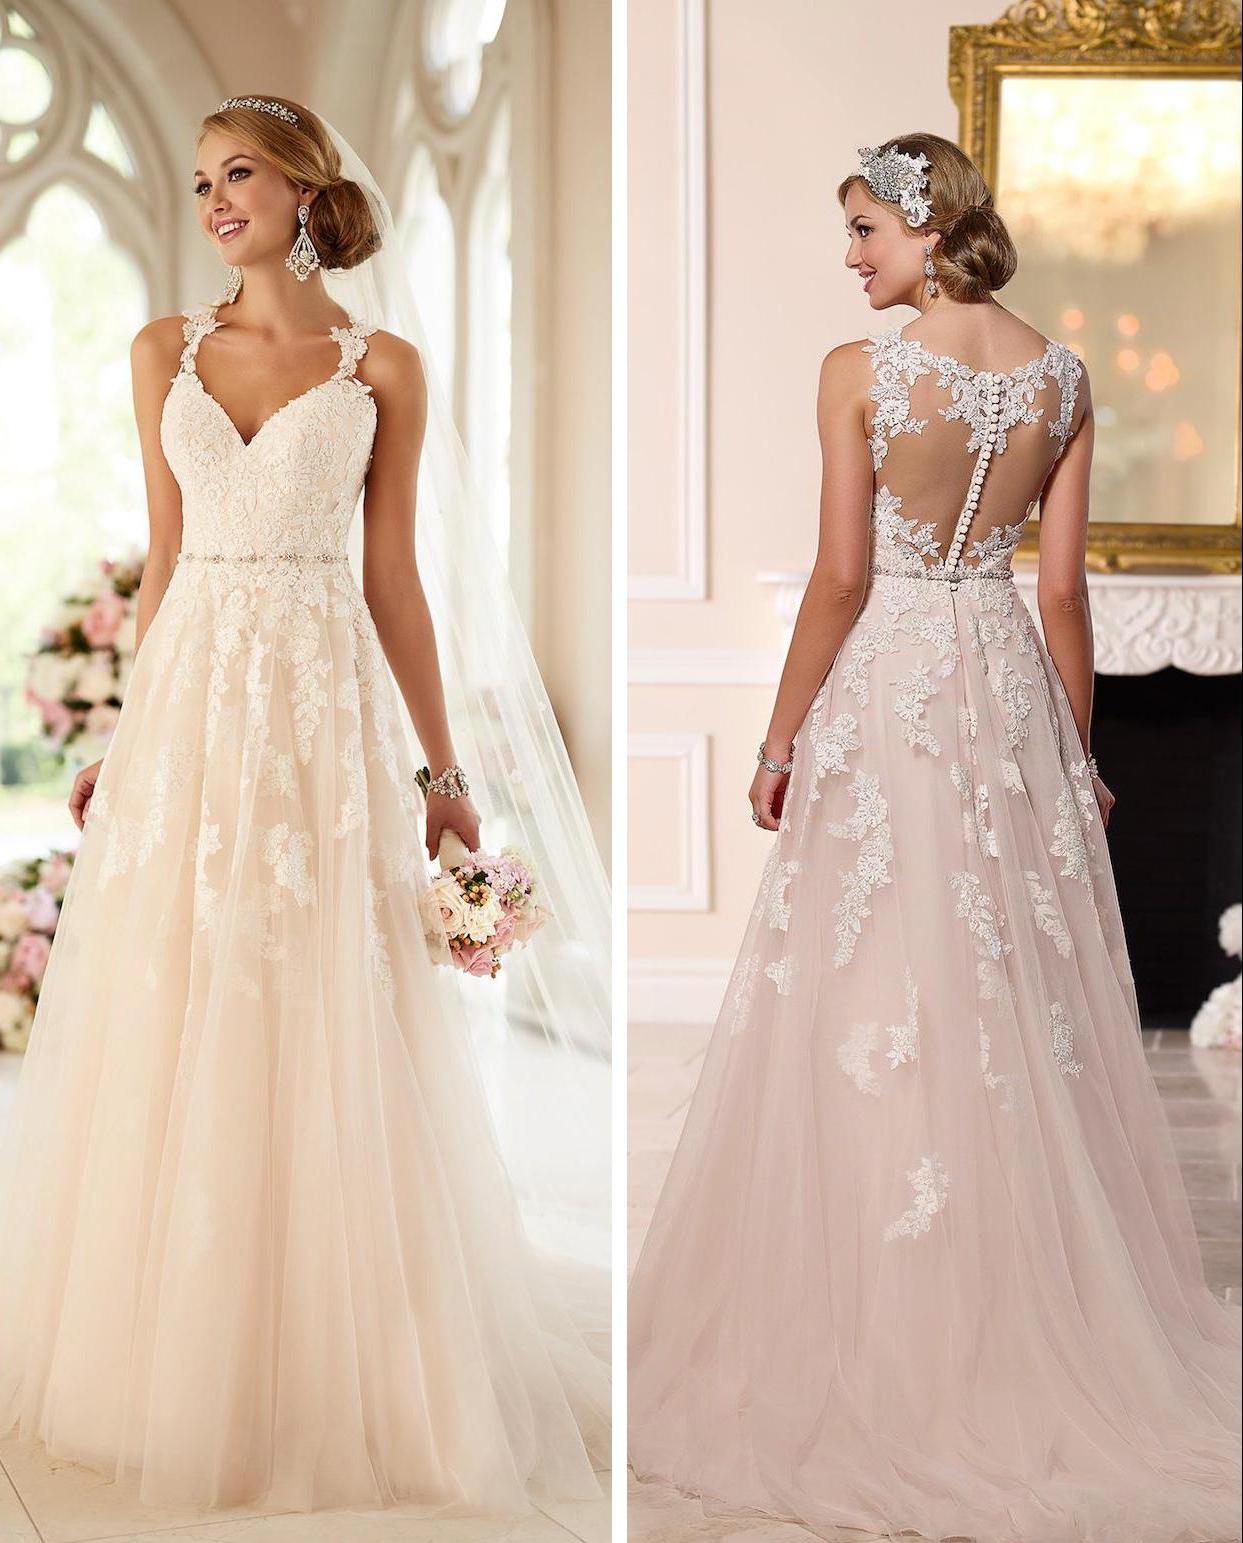 Blush A-line wedding gown with lace